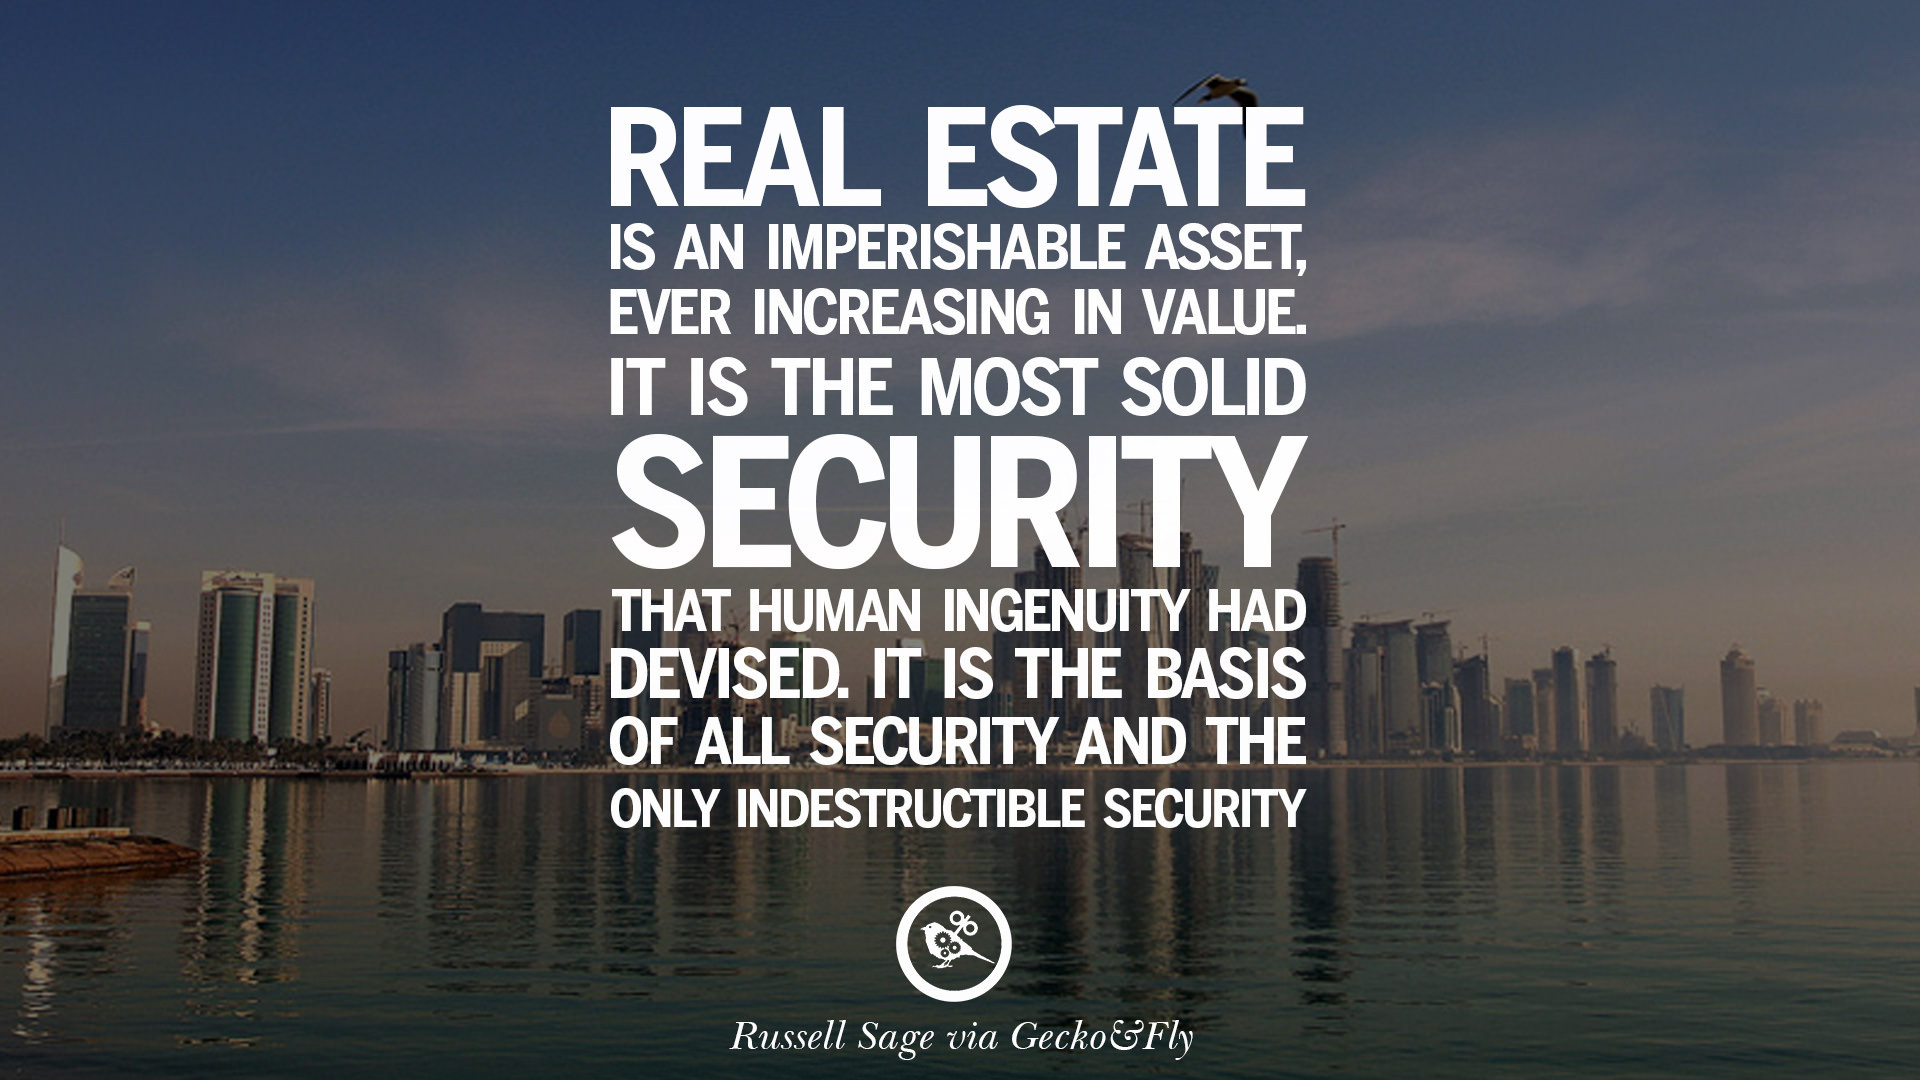 Inspirational Real Estate Quotes
 10 Quotes Real Estate Investing And Property Investment